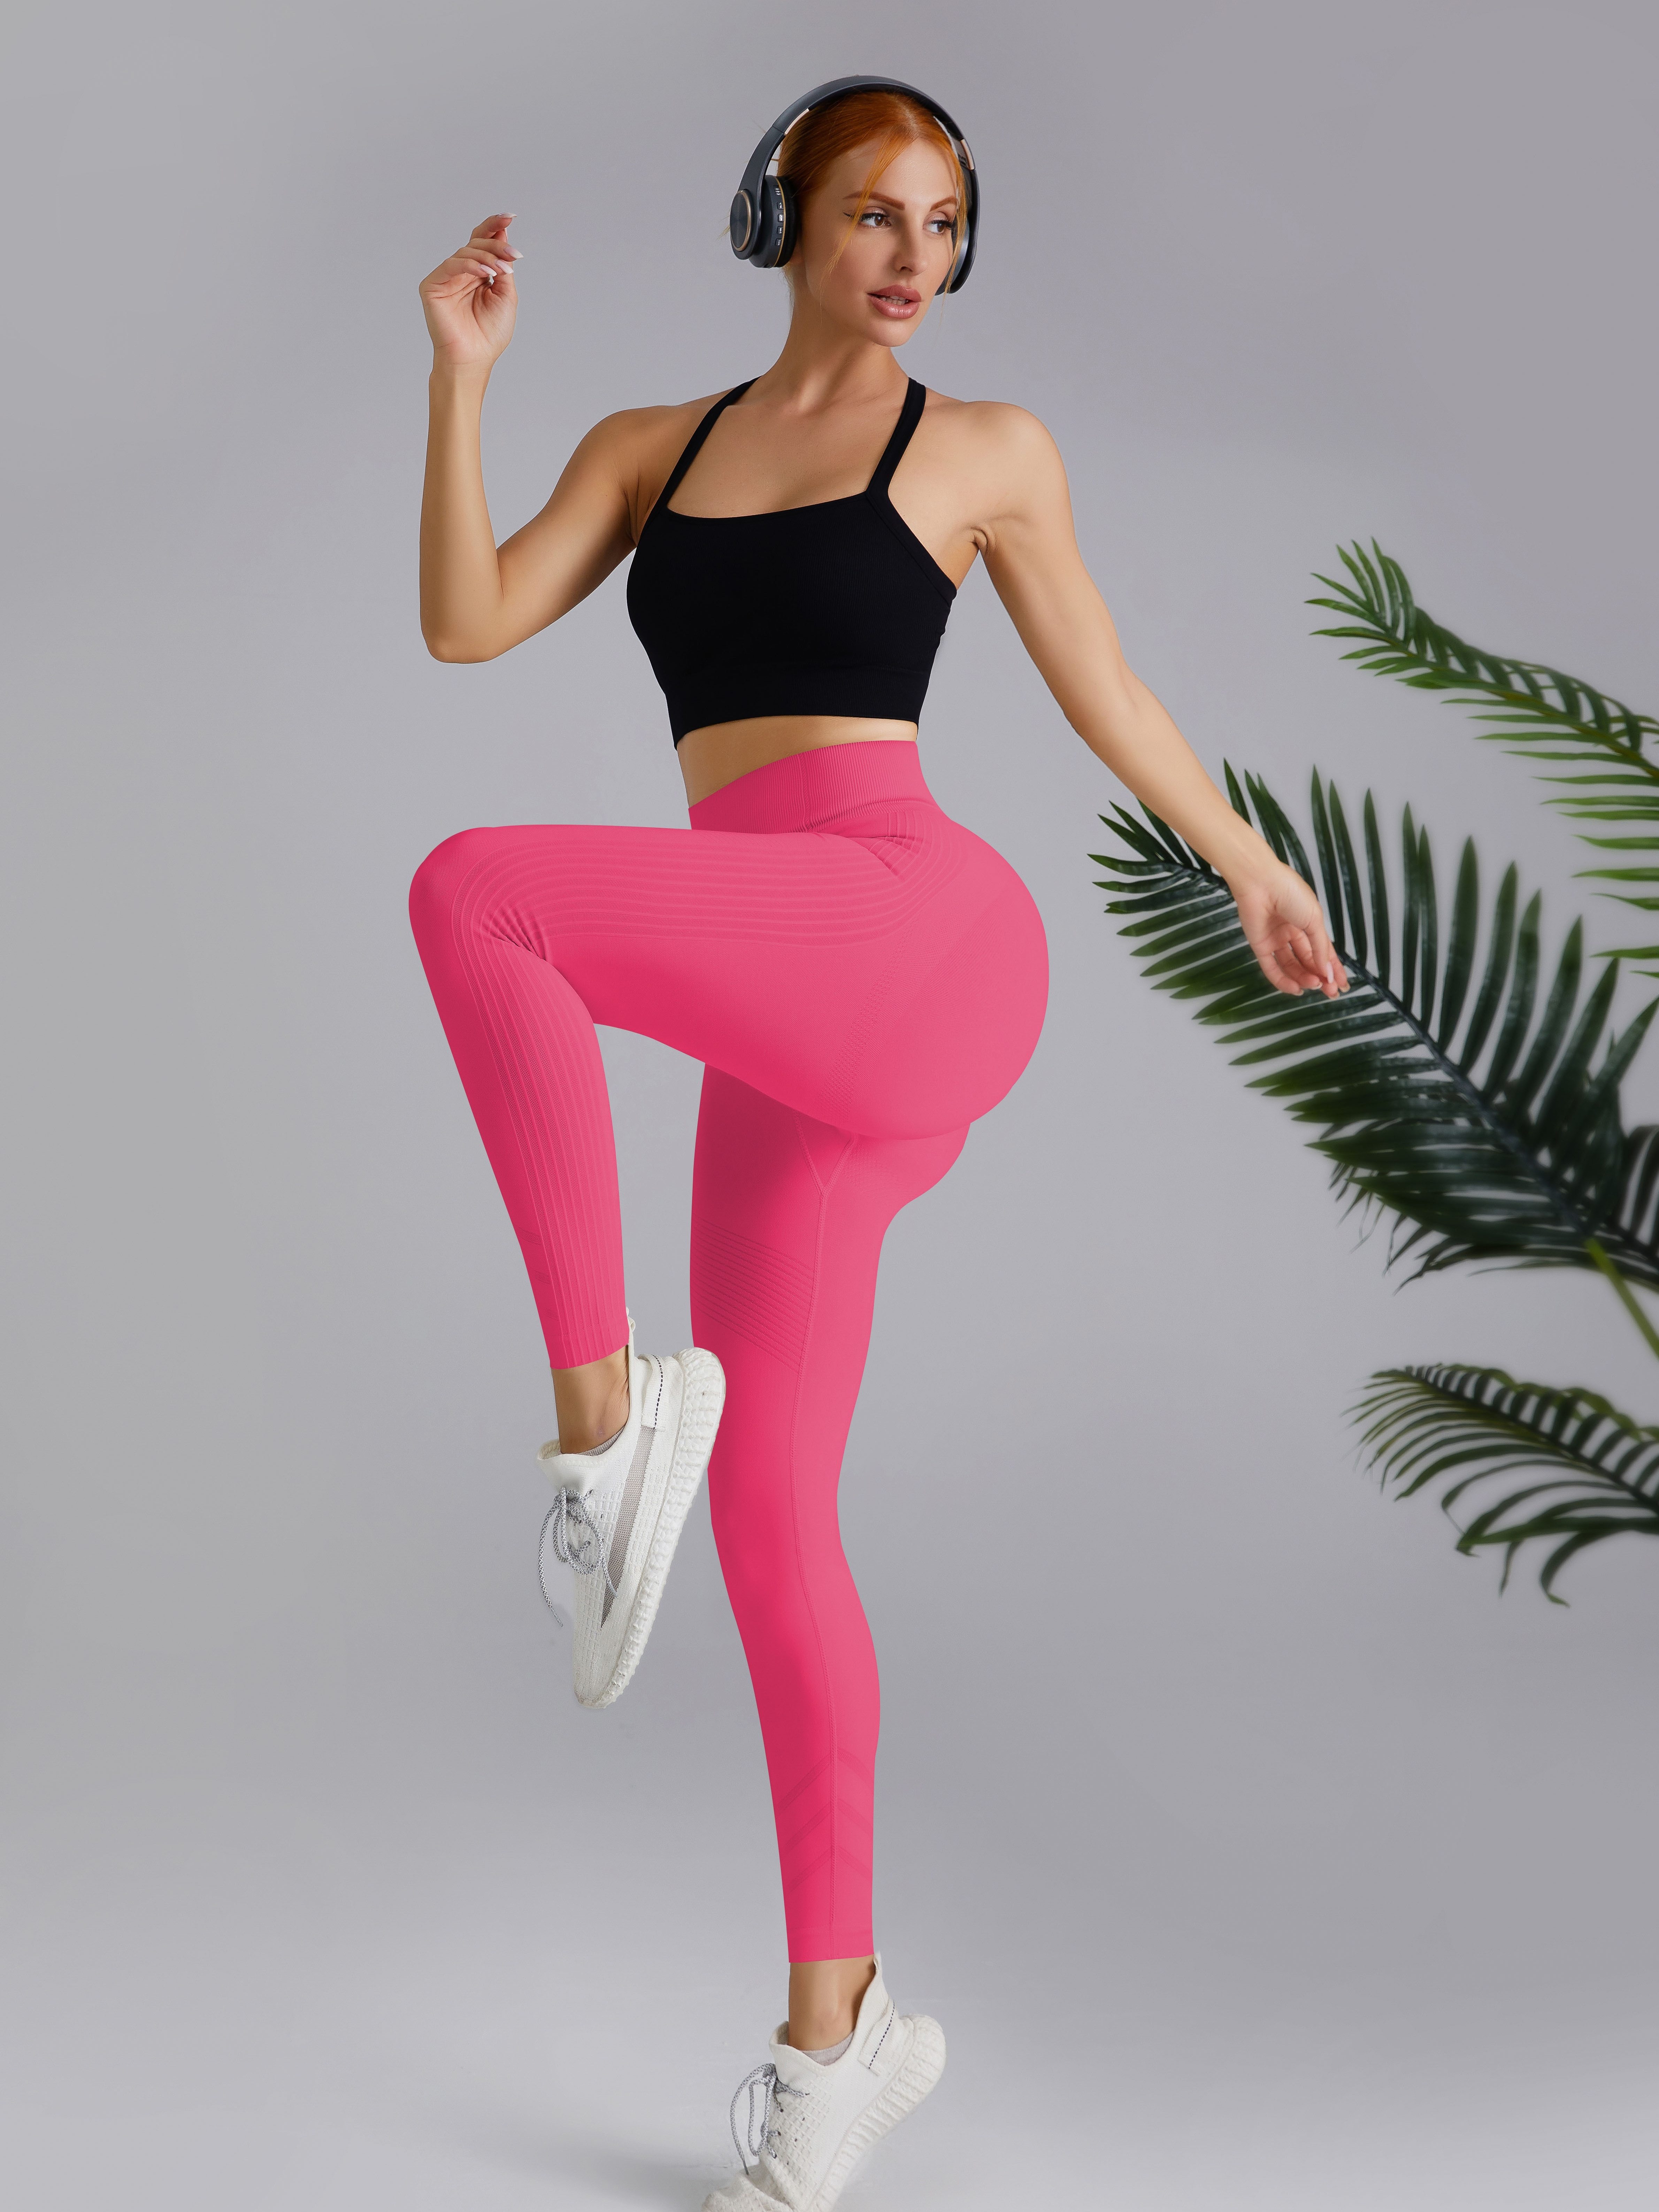 Compression Yoga Pants for Women Comfort Butt Lifting Athletic